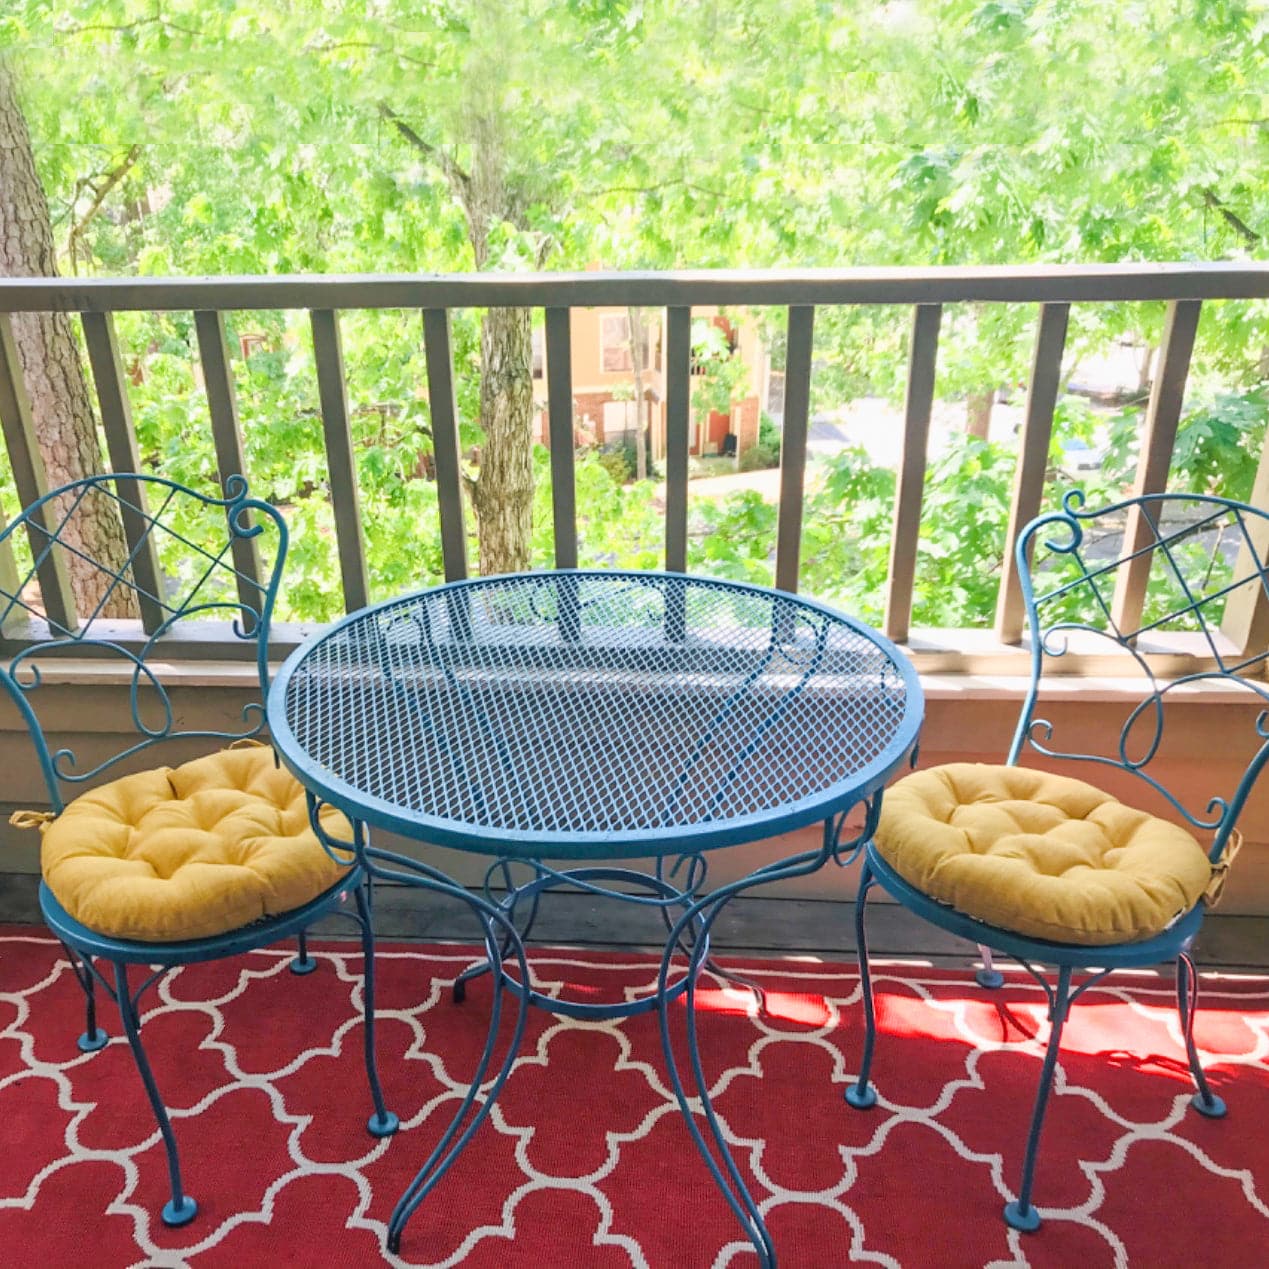 Bright Yellow Round Cushion Pads with ties